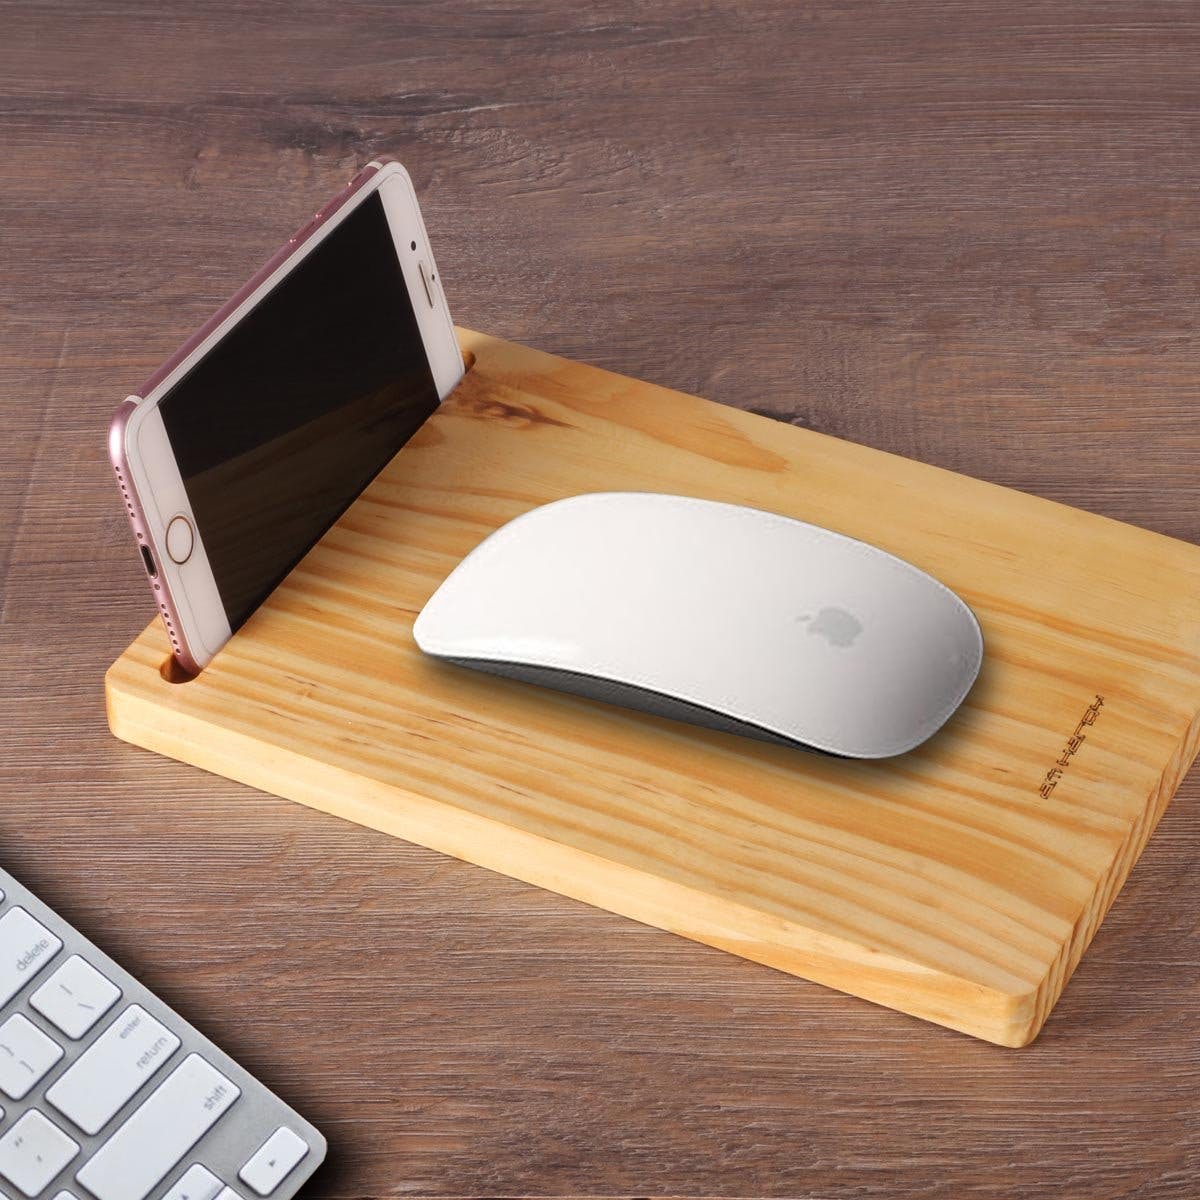 Electronic device,Technology,Gadget,Mouse,Wood,Laptop,Netbook,Electronics,Cutting board,Input device